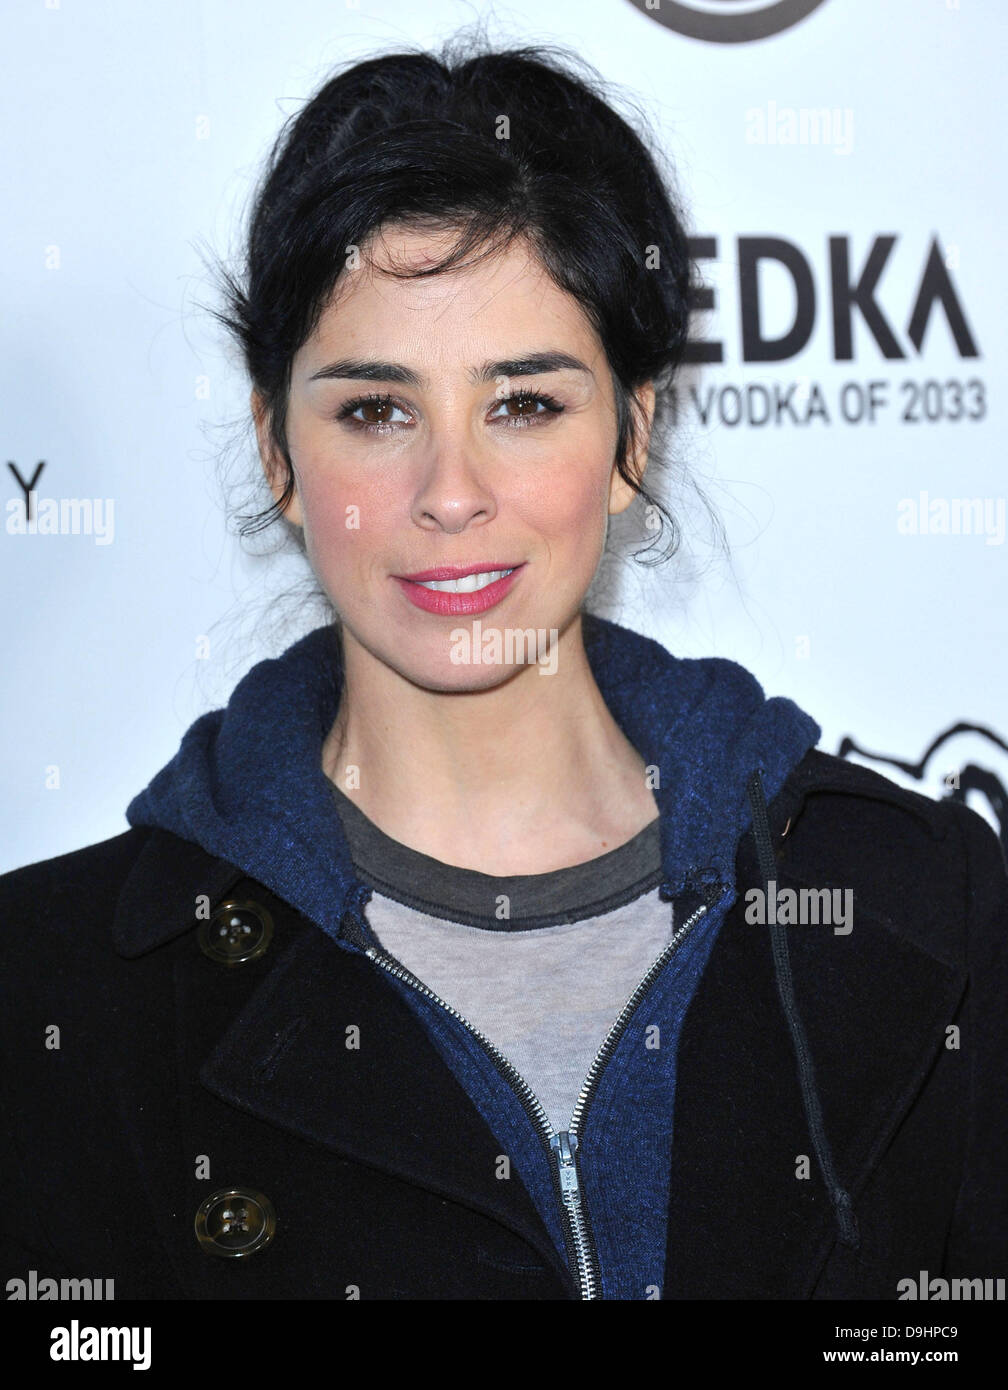 Sarah Silverman Los Angeles premiere of 'Super' held at The Egyptian Theatre - Arrivals Los Angeles, California - 21.03.11 Stock Photo